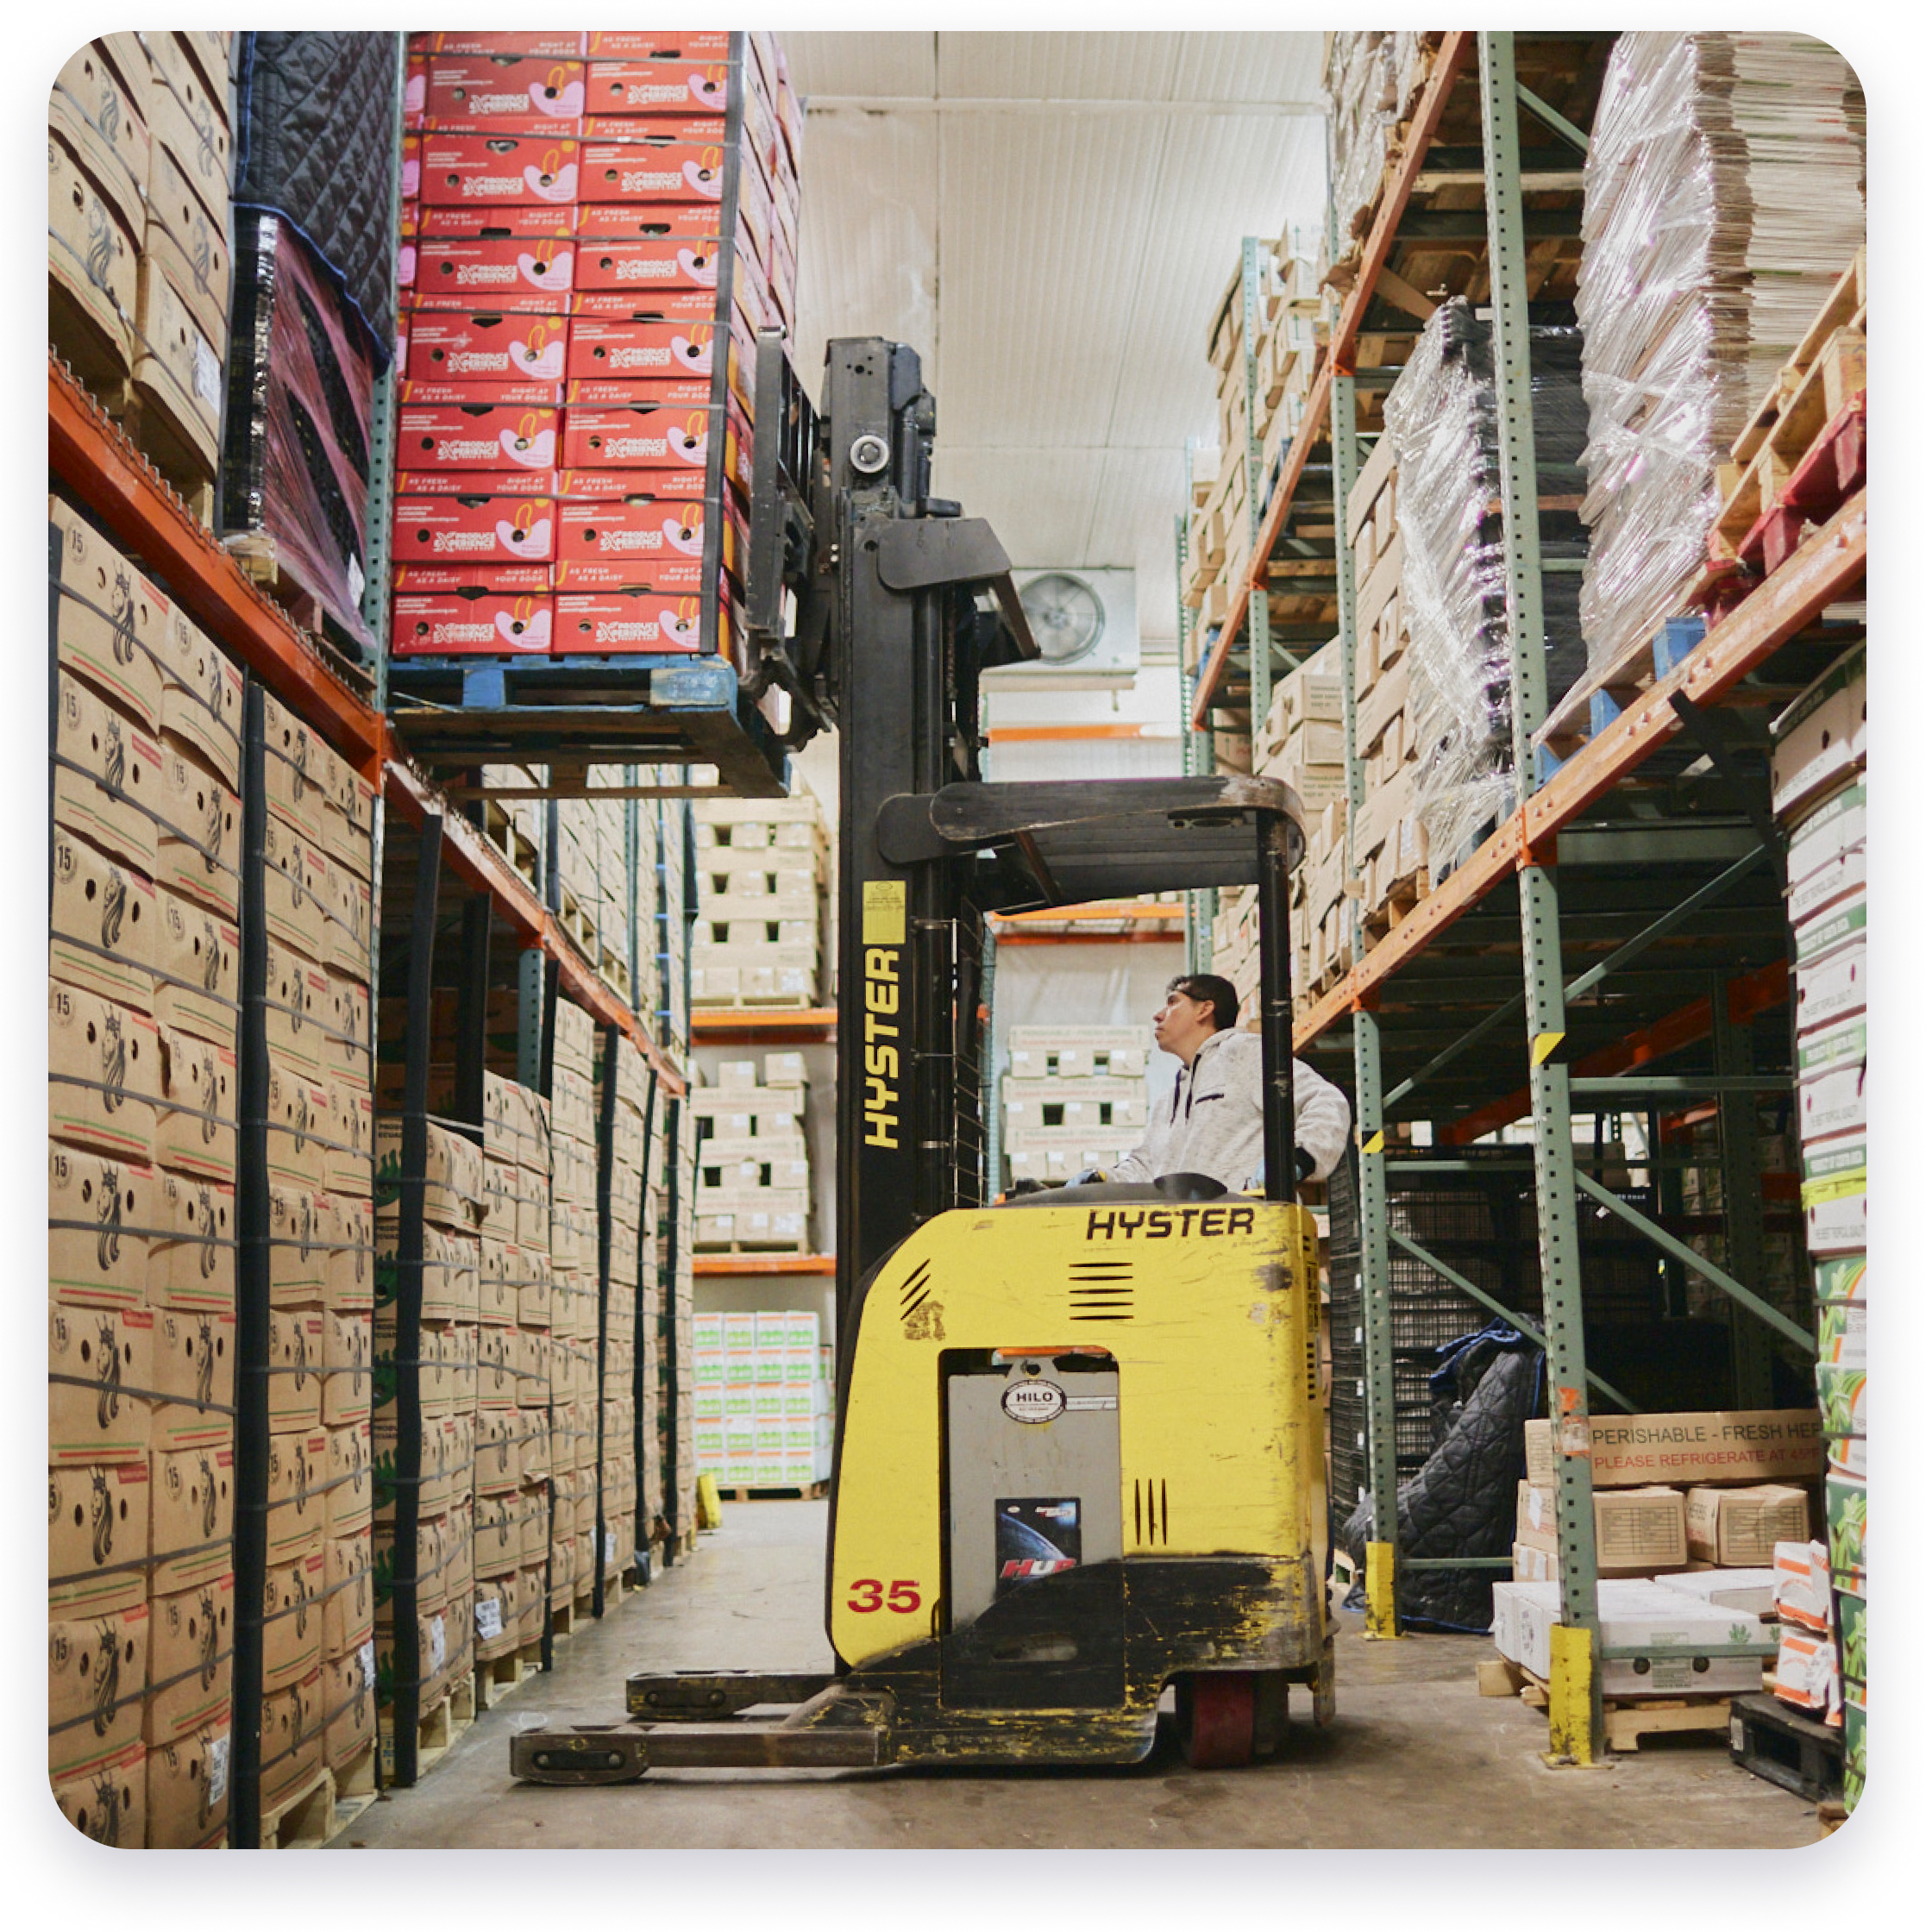 Forklift loading pallets in a warehouse